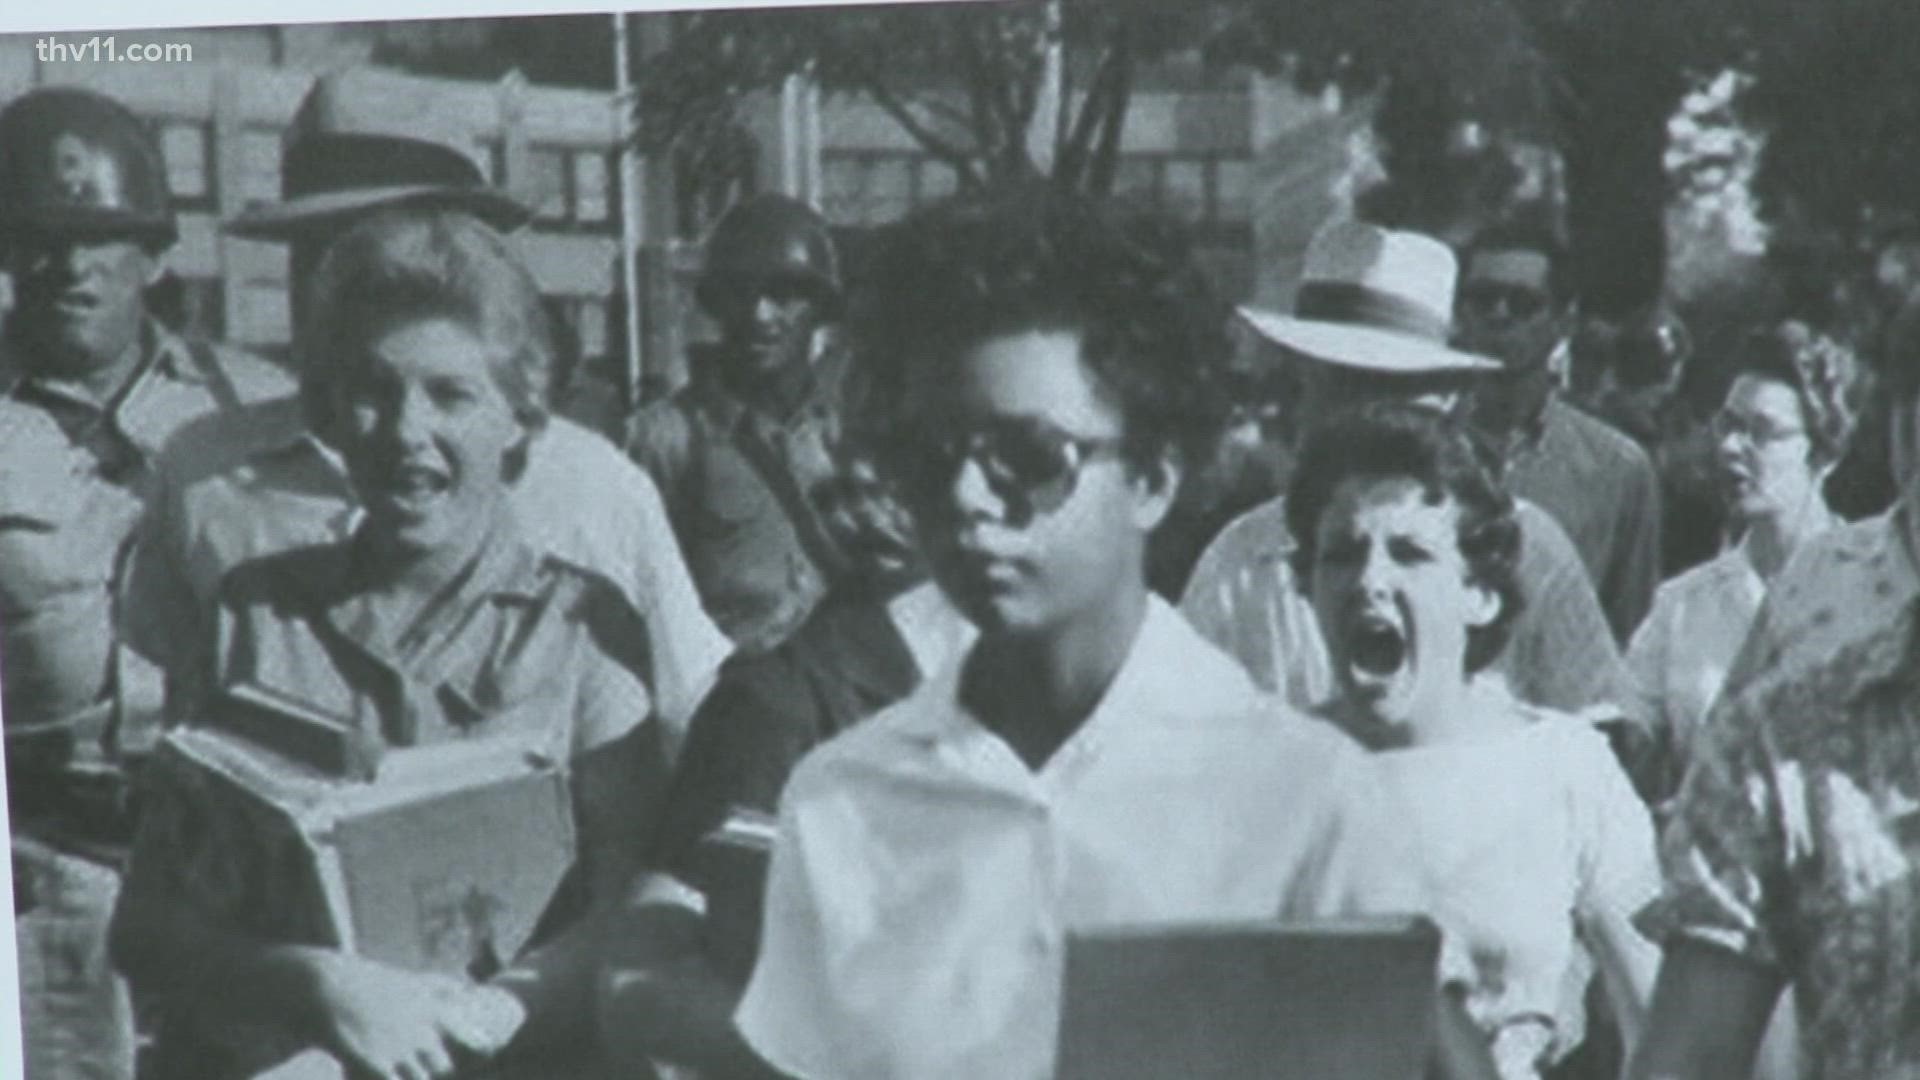 Thursday kicks off multiple days of commemorative events for the 65th anniversary of the Little Rock Nine's integration of Central High School.